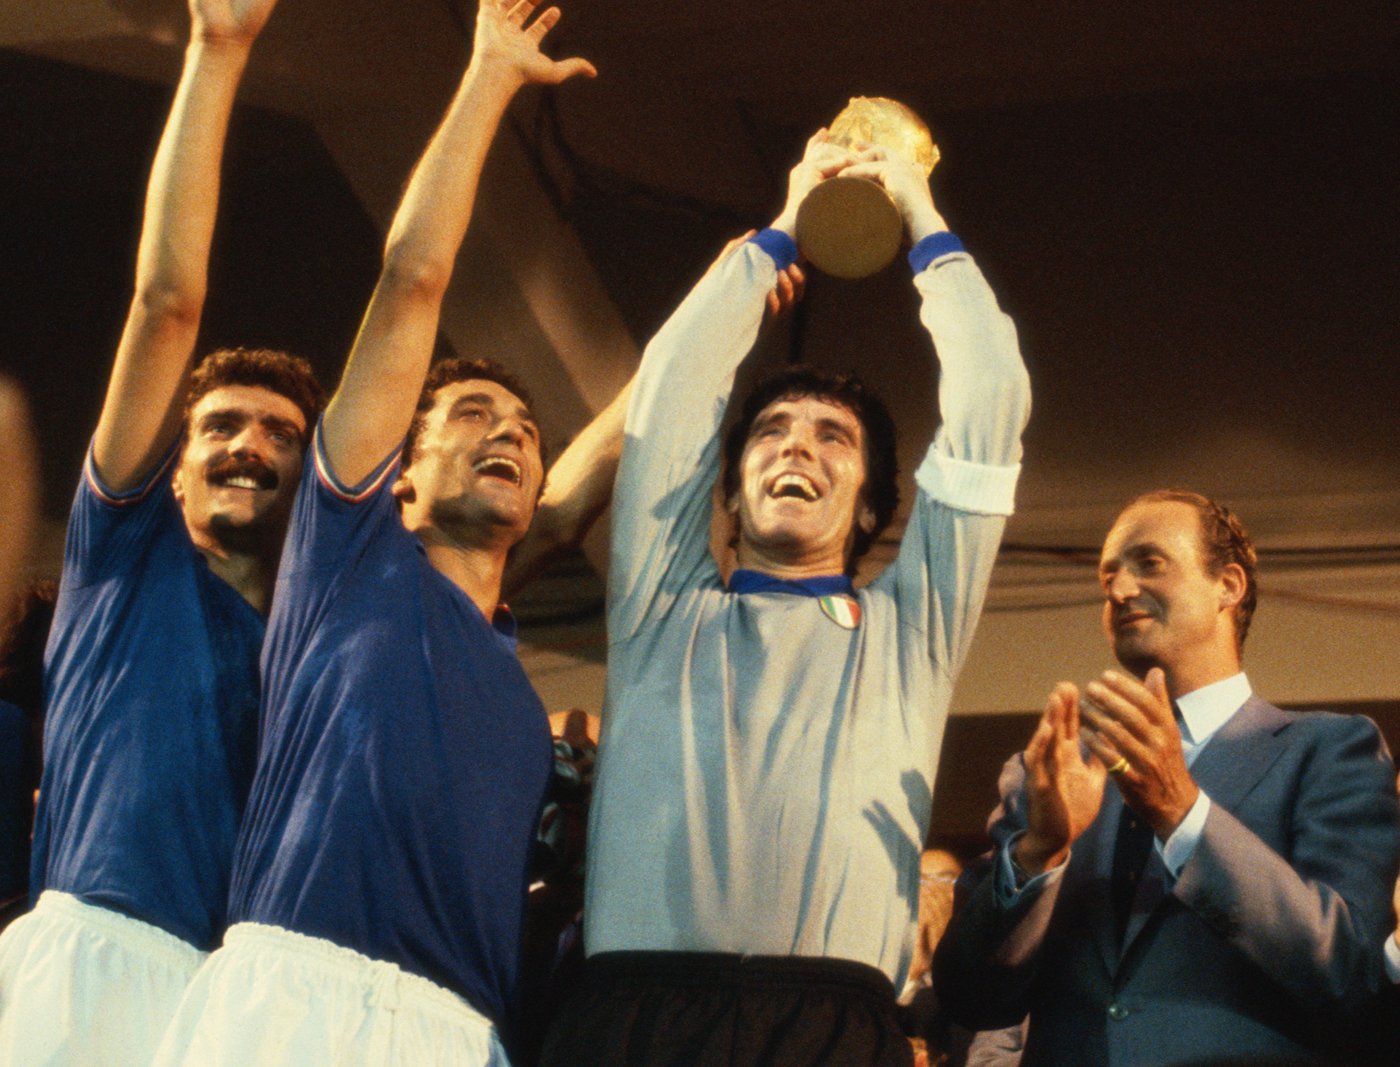 Ex-Juventus Goalkeeper Dino Zoff: “It’s A Big Game With The Cup Up For Grabs, The Ultimate Fixture”